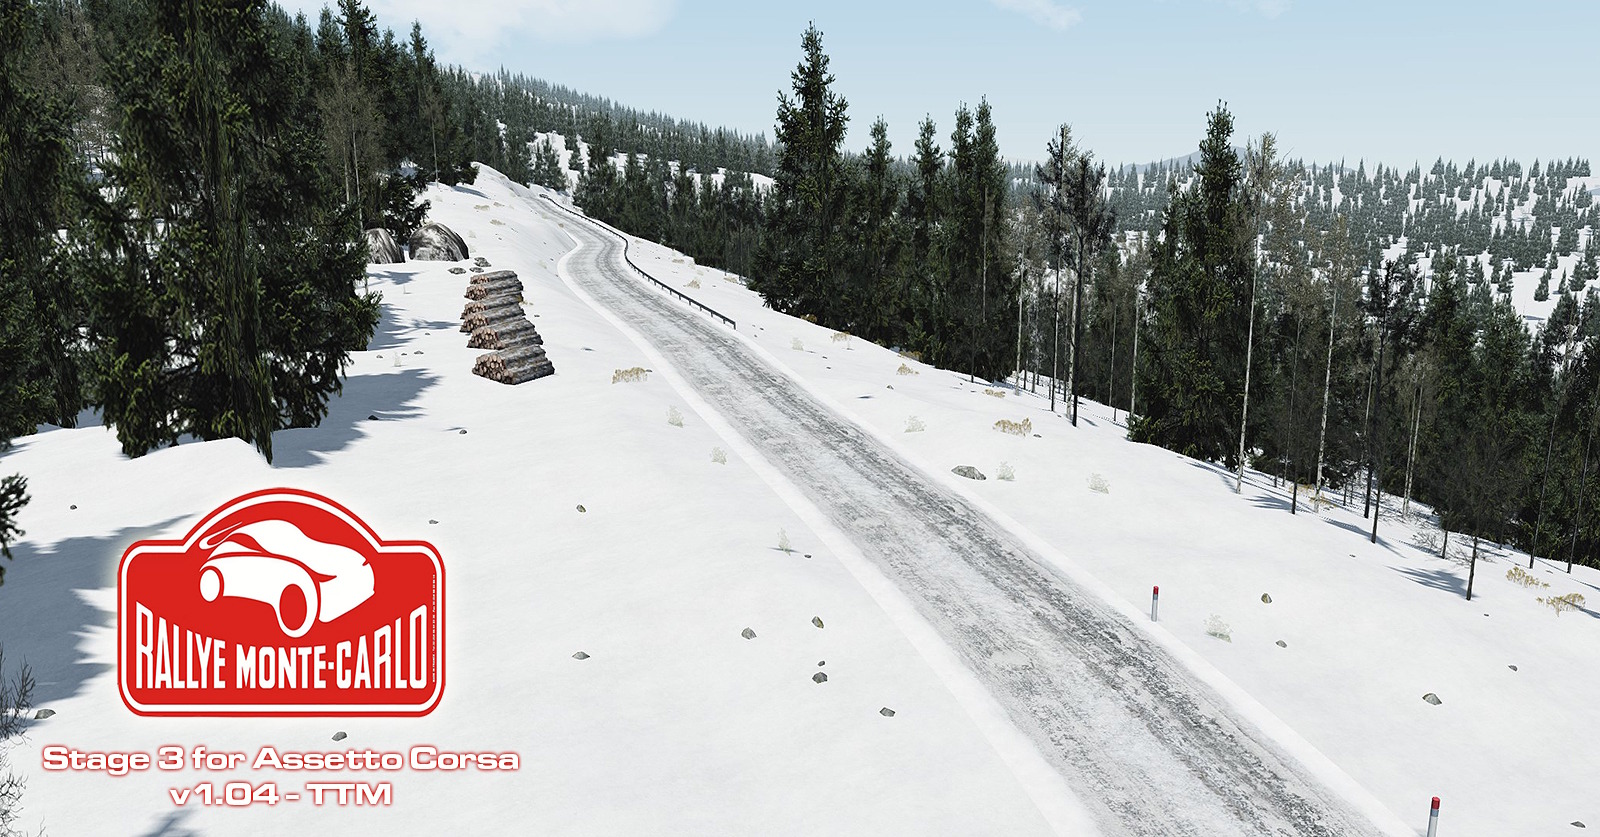 Rally Monte Carlo Stage 3 Assetto Corsa.jpg